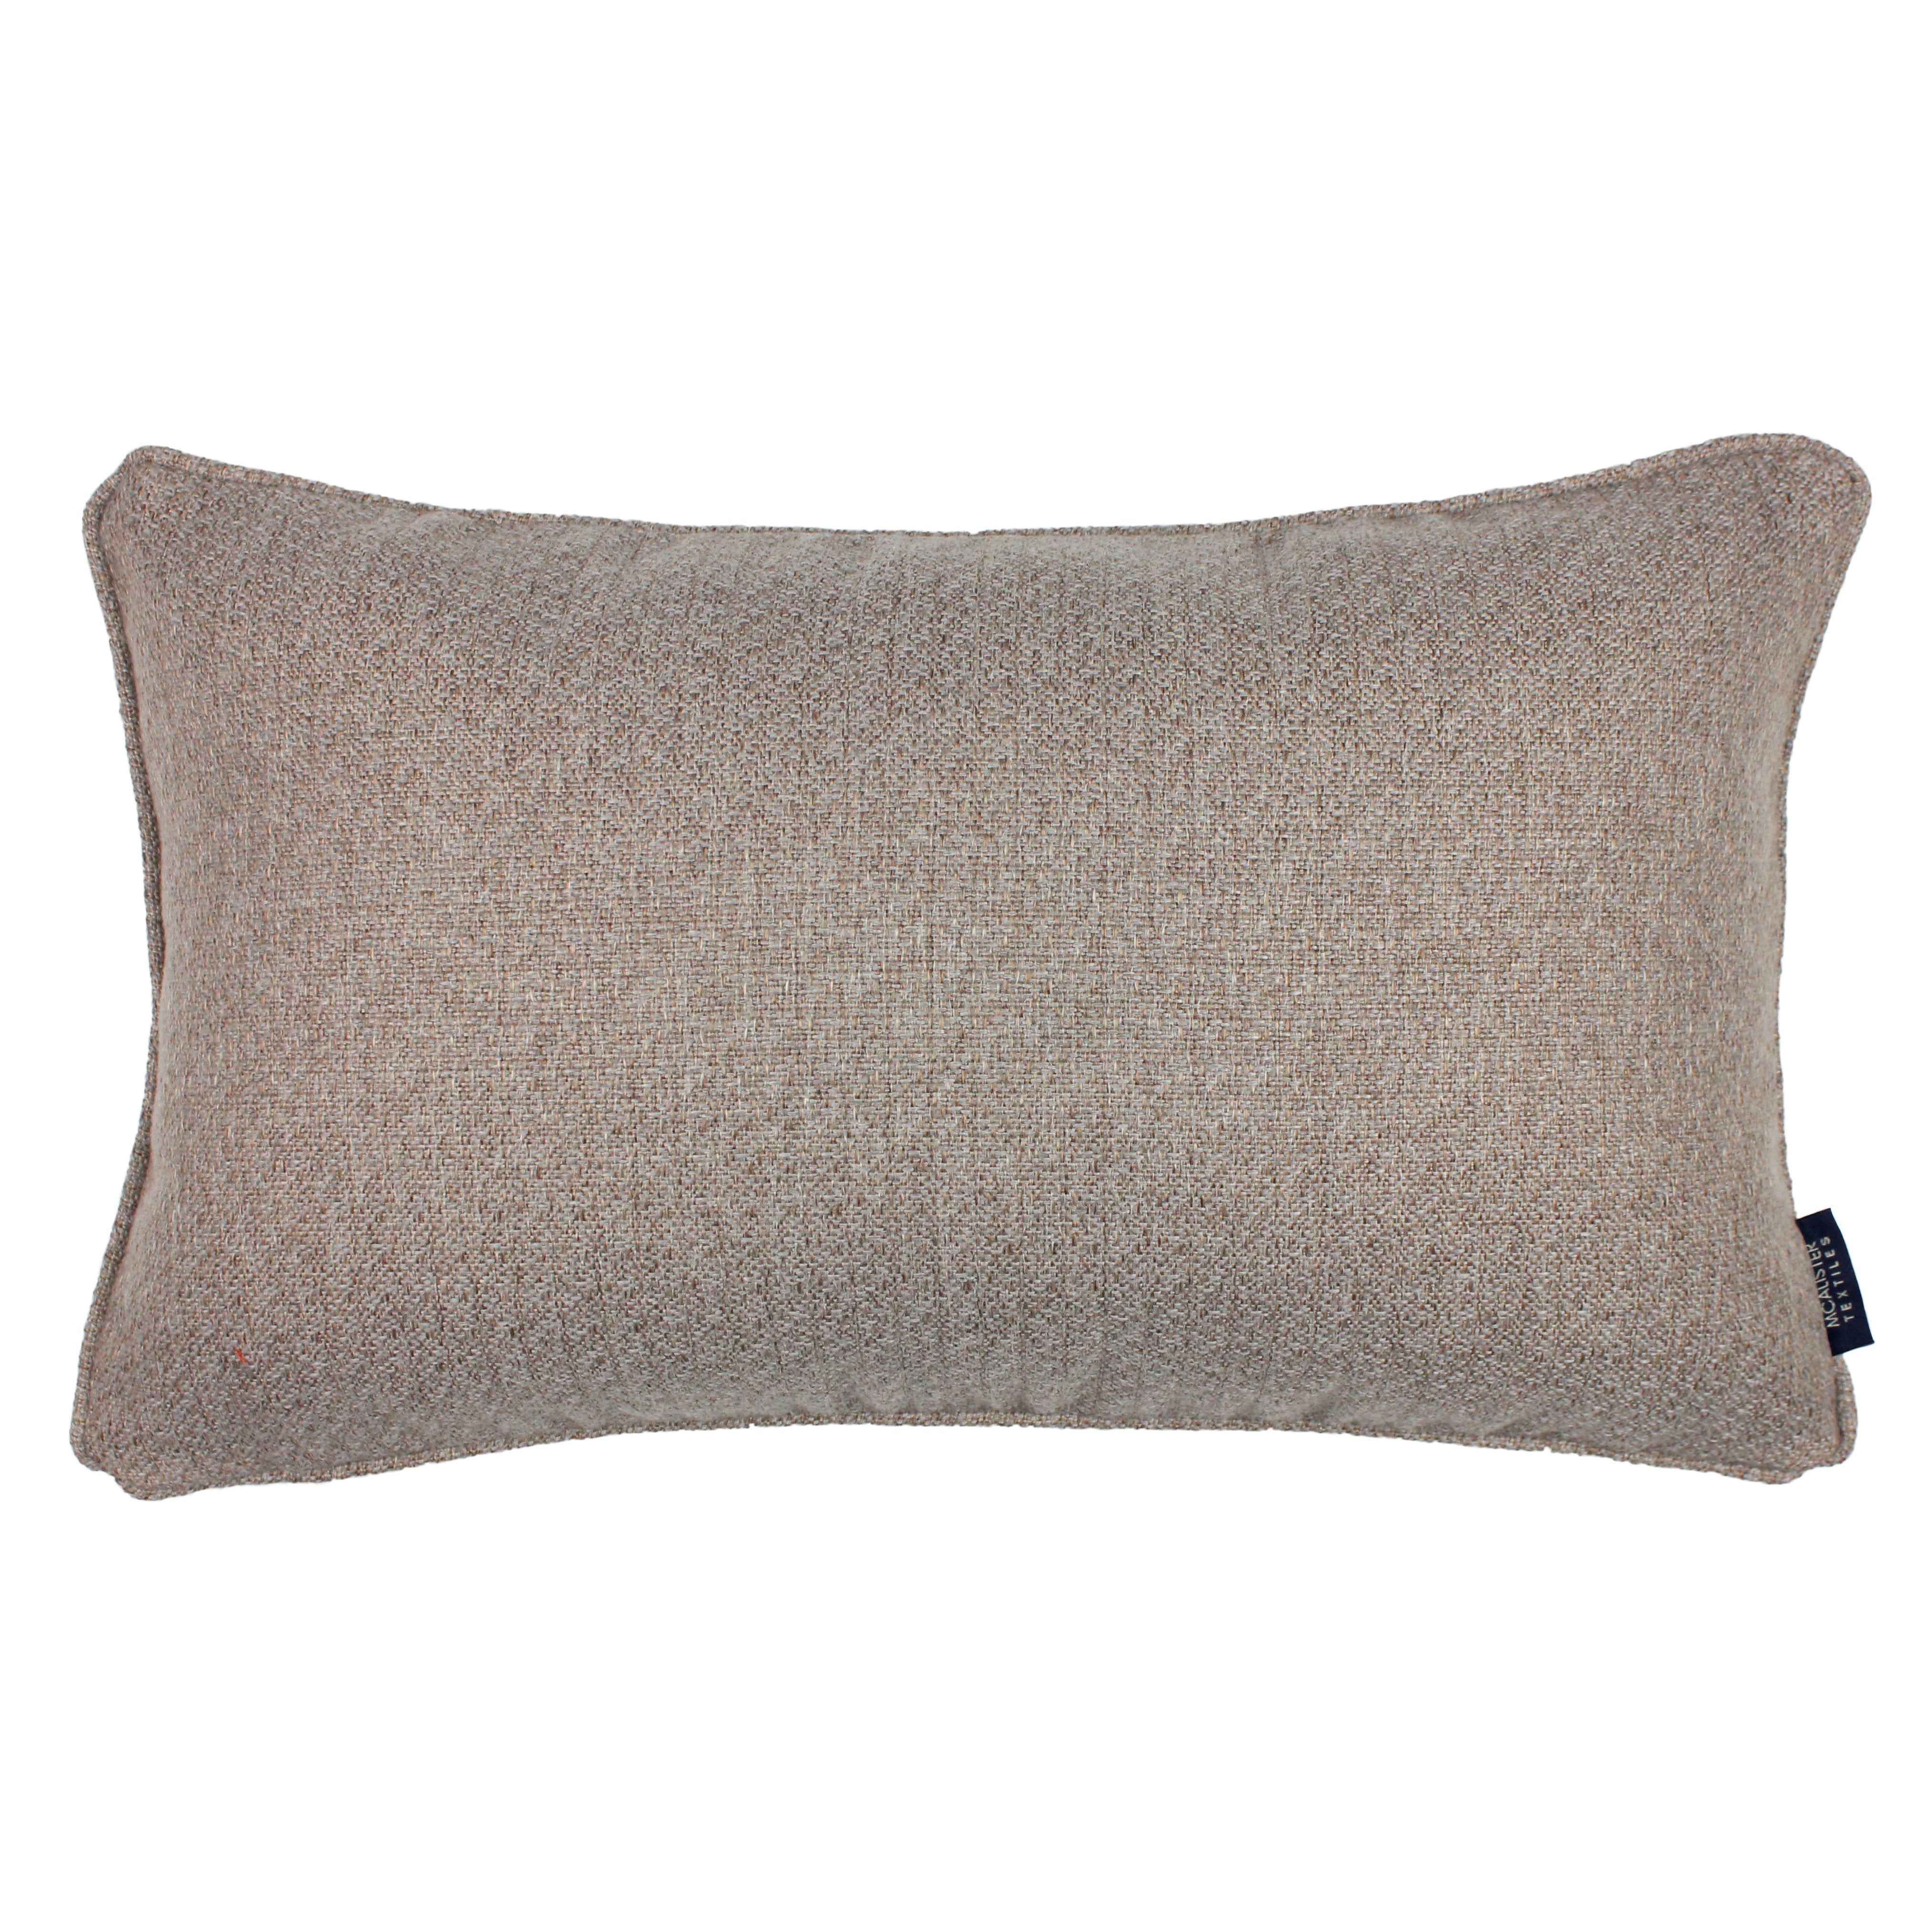 McAlister Textiles Highlands Taupe Textured Plain Pillow Pillow Cover Only 50cm x 30cm 